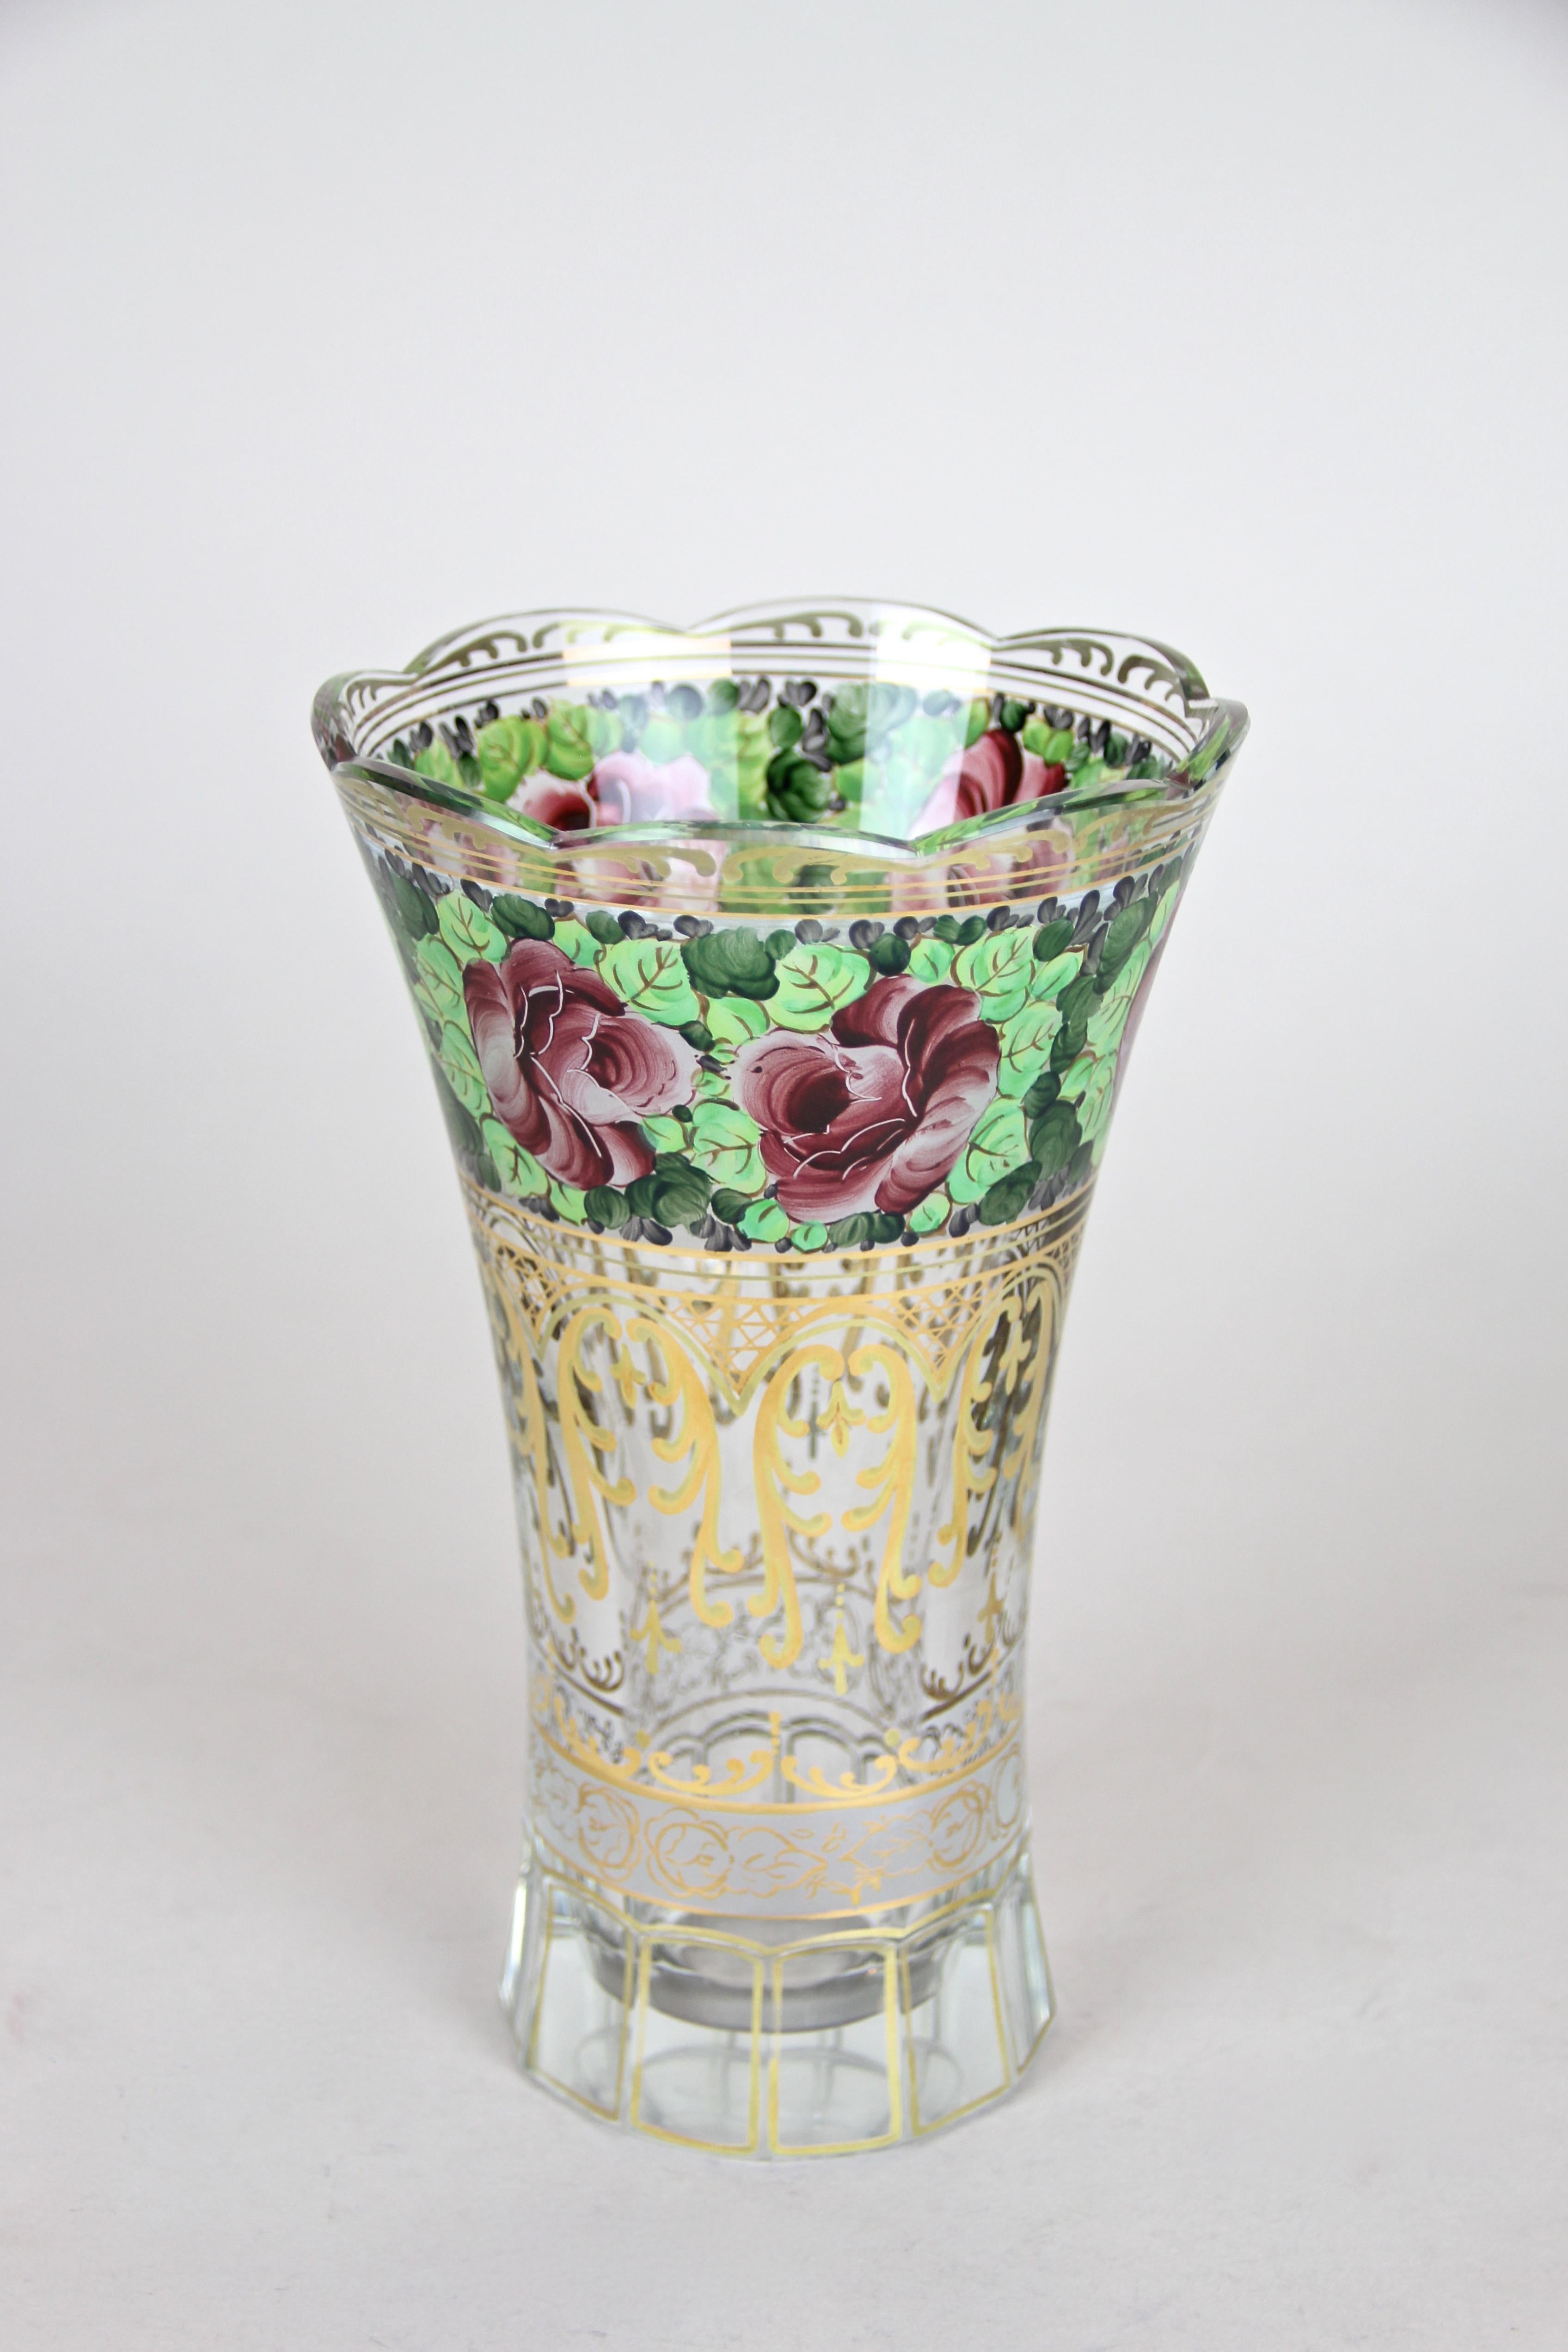 Very decorative hand painted glass vase from the 20th century in Austria. Processed in the late Art Nouveau period circa 1920, this great looking vase is adorned by artfully hand painted flowers/ foliage and fantastic golden decorations. A truley